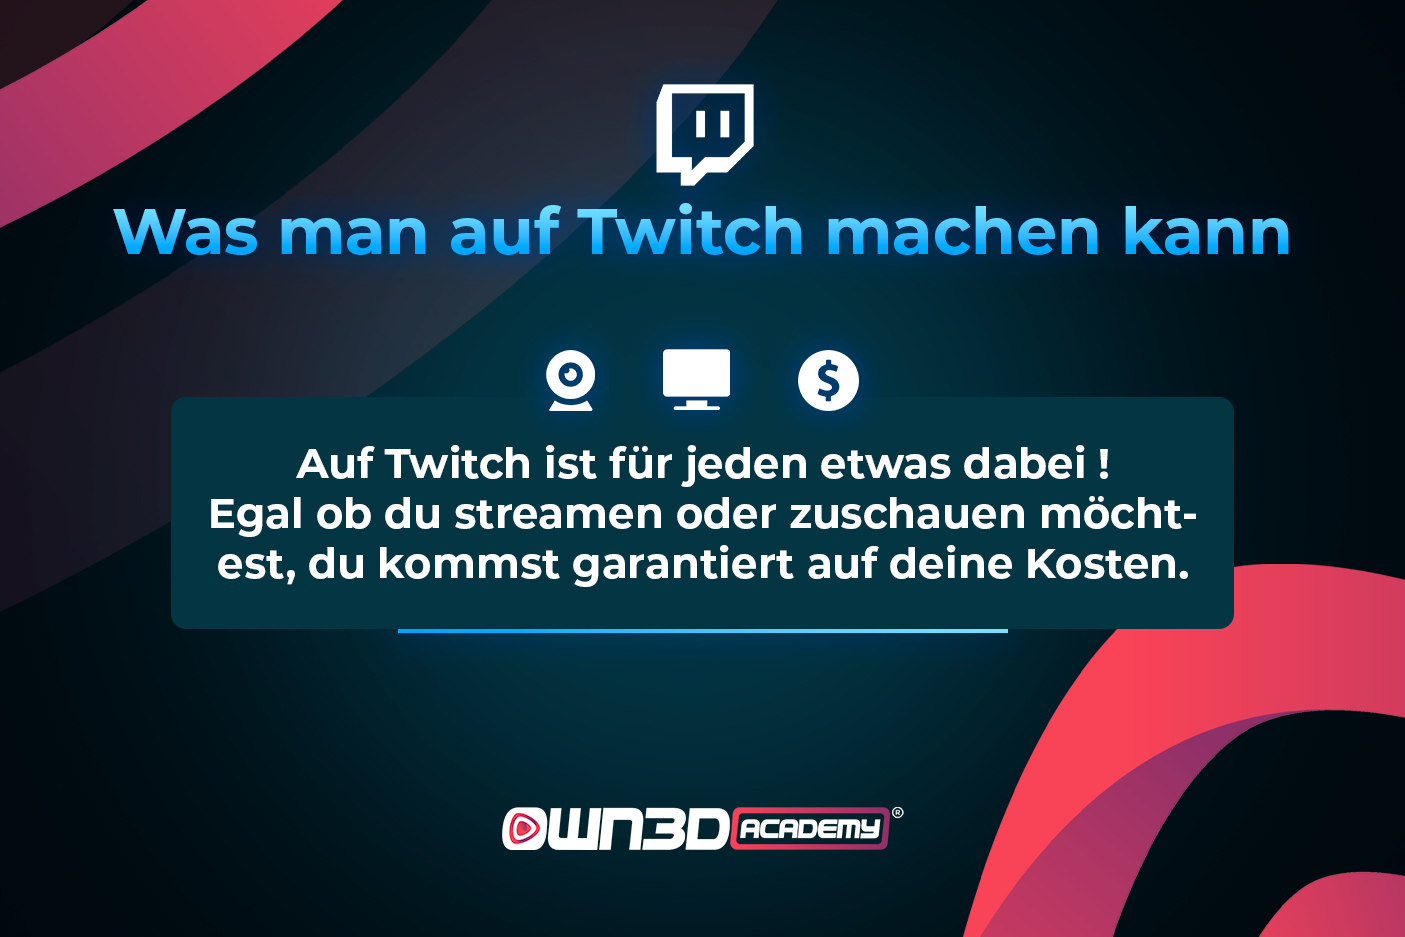 TWITCH_History-and-Keyfacts_GER_what-can-you-do-on-twitch.jpg